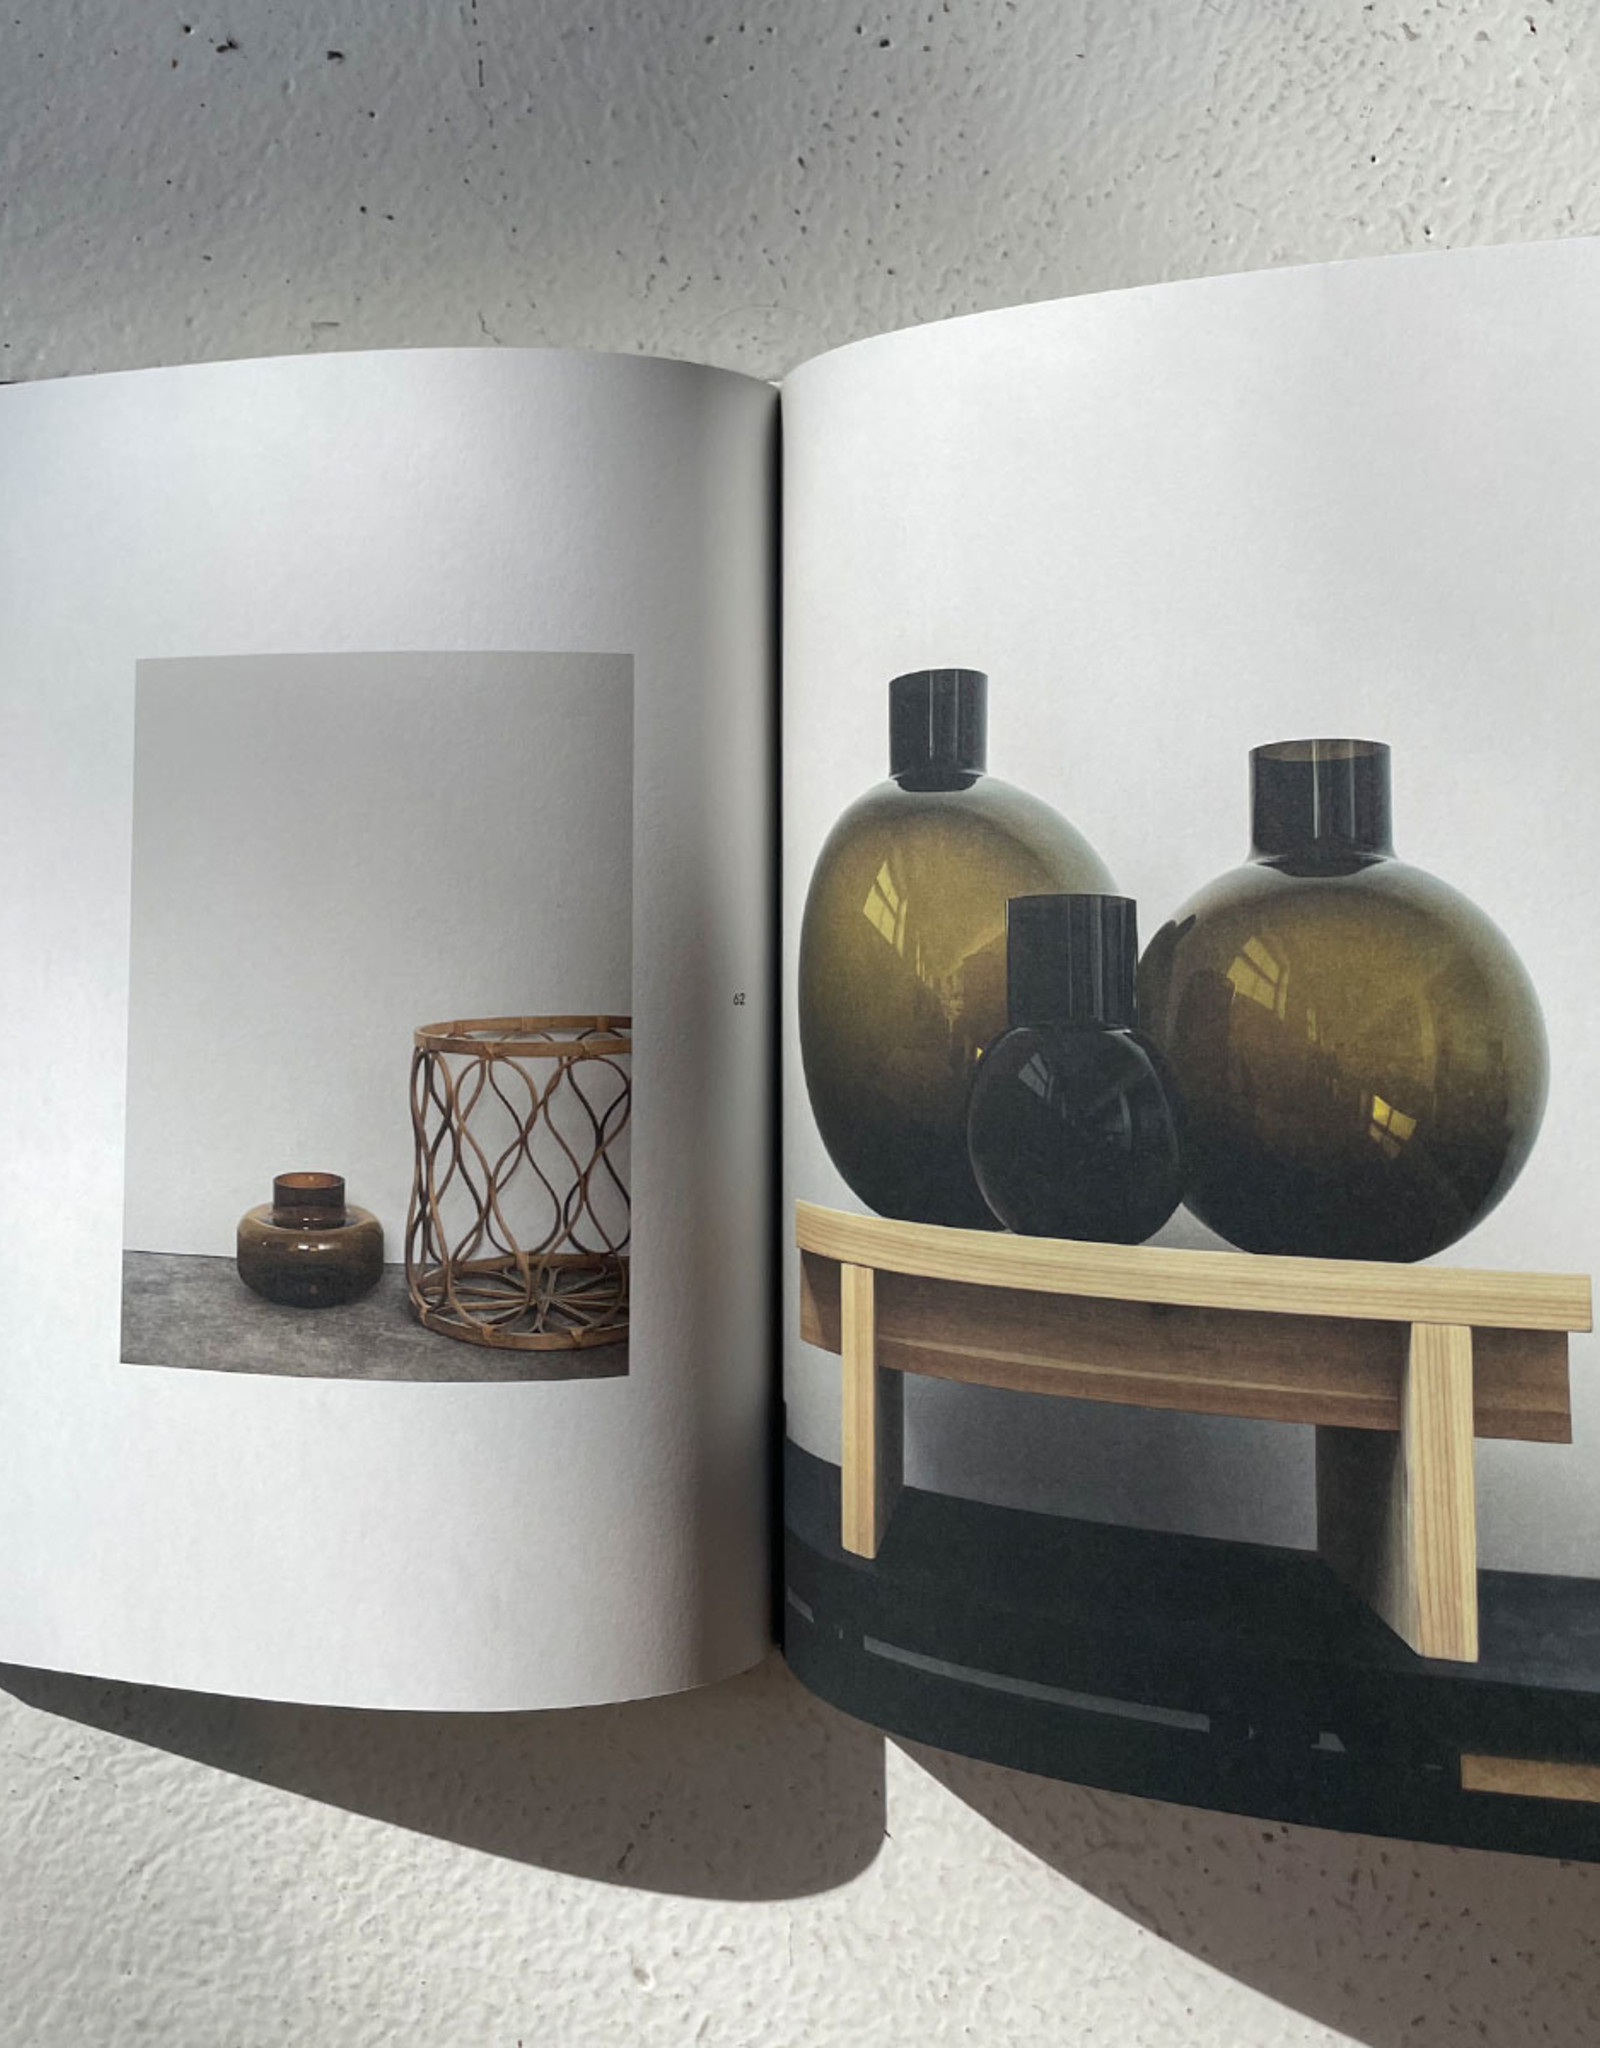 Work by Carina Seth Andersson | Hardcover Book